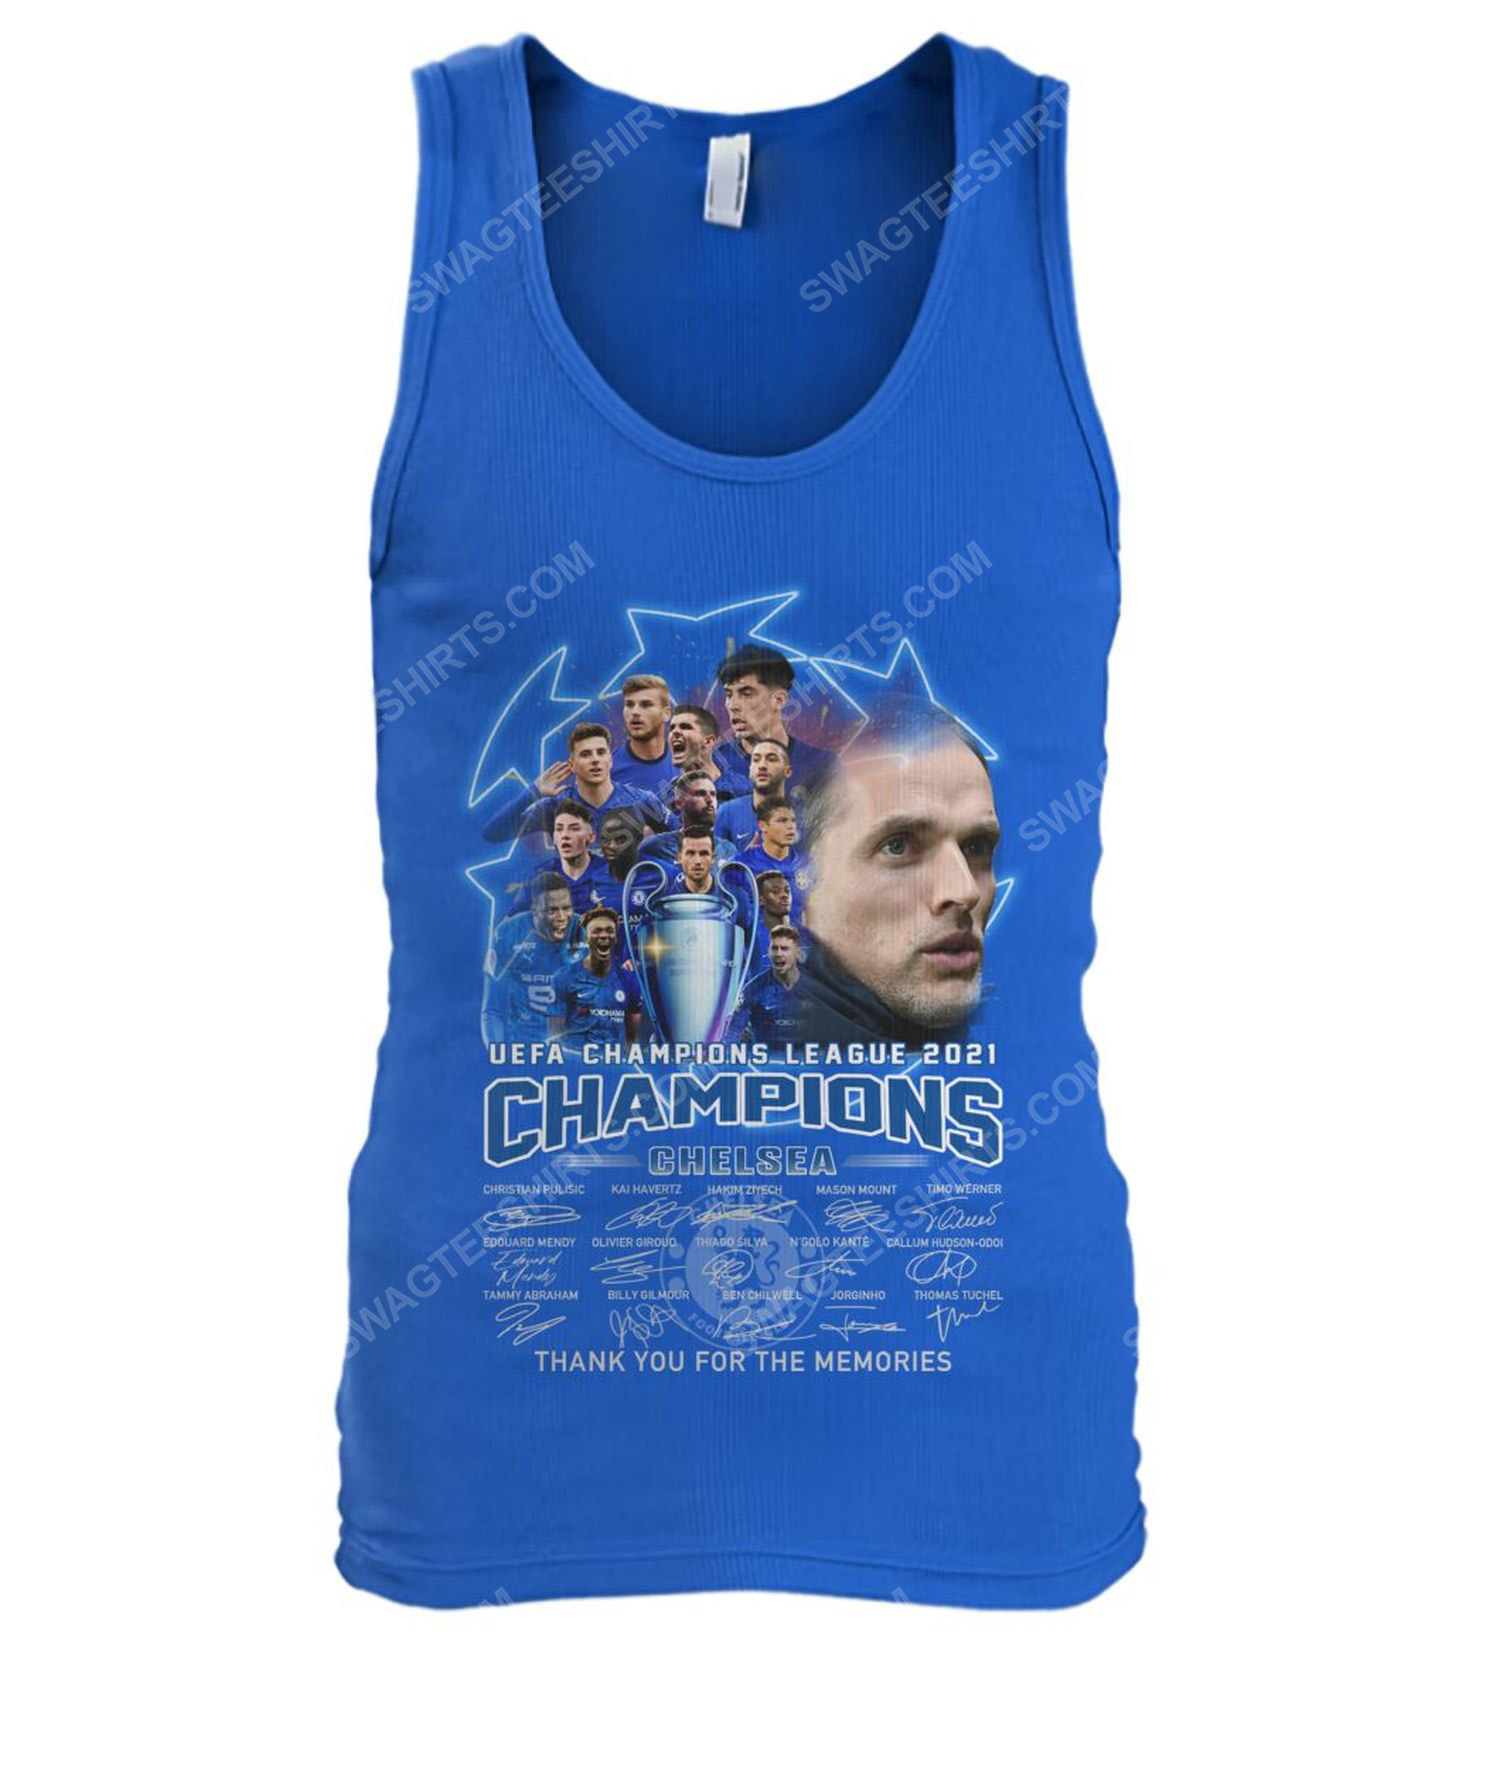 UEFA champions league 2021 chelsea fc thank you for the memories tank top